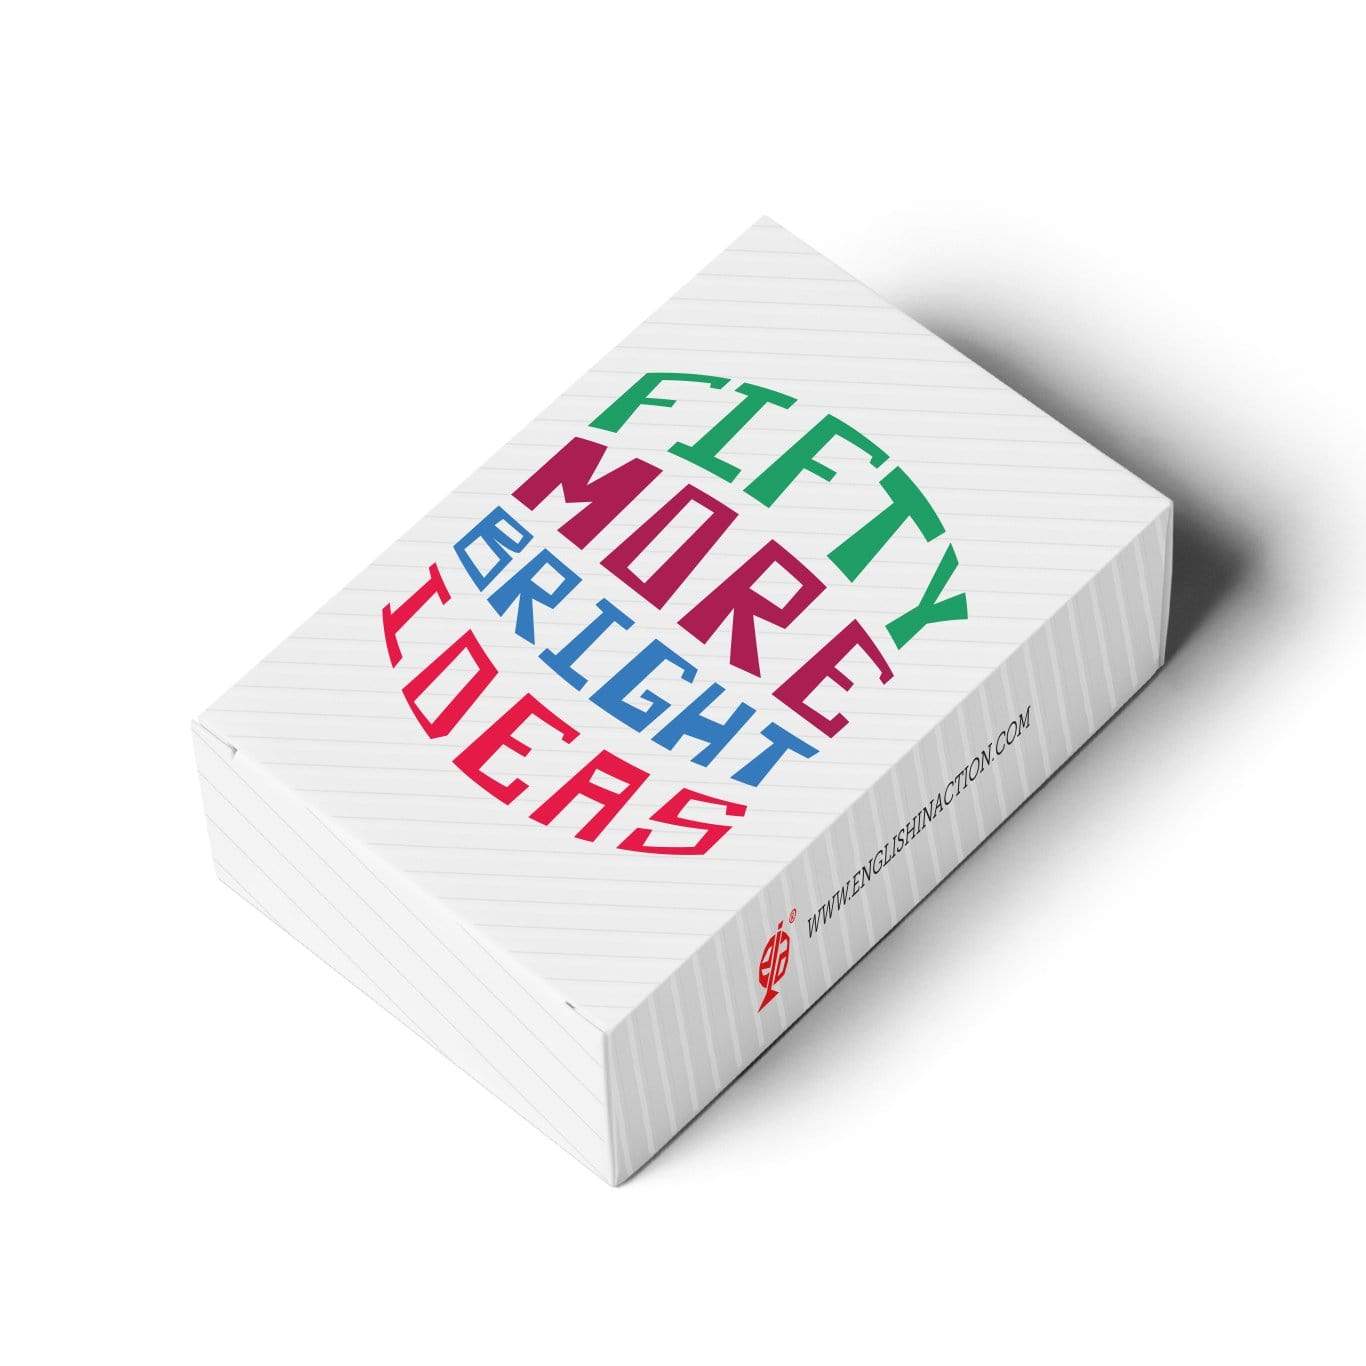 Fifty More Bright Ideas - Card Pack - Teacher-Toolkit.co.uk